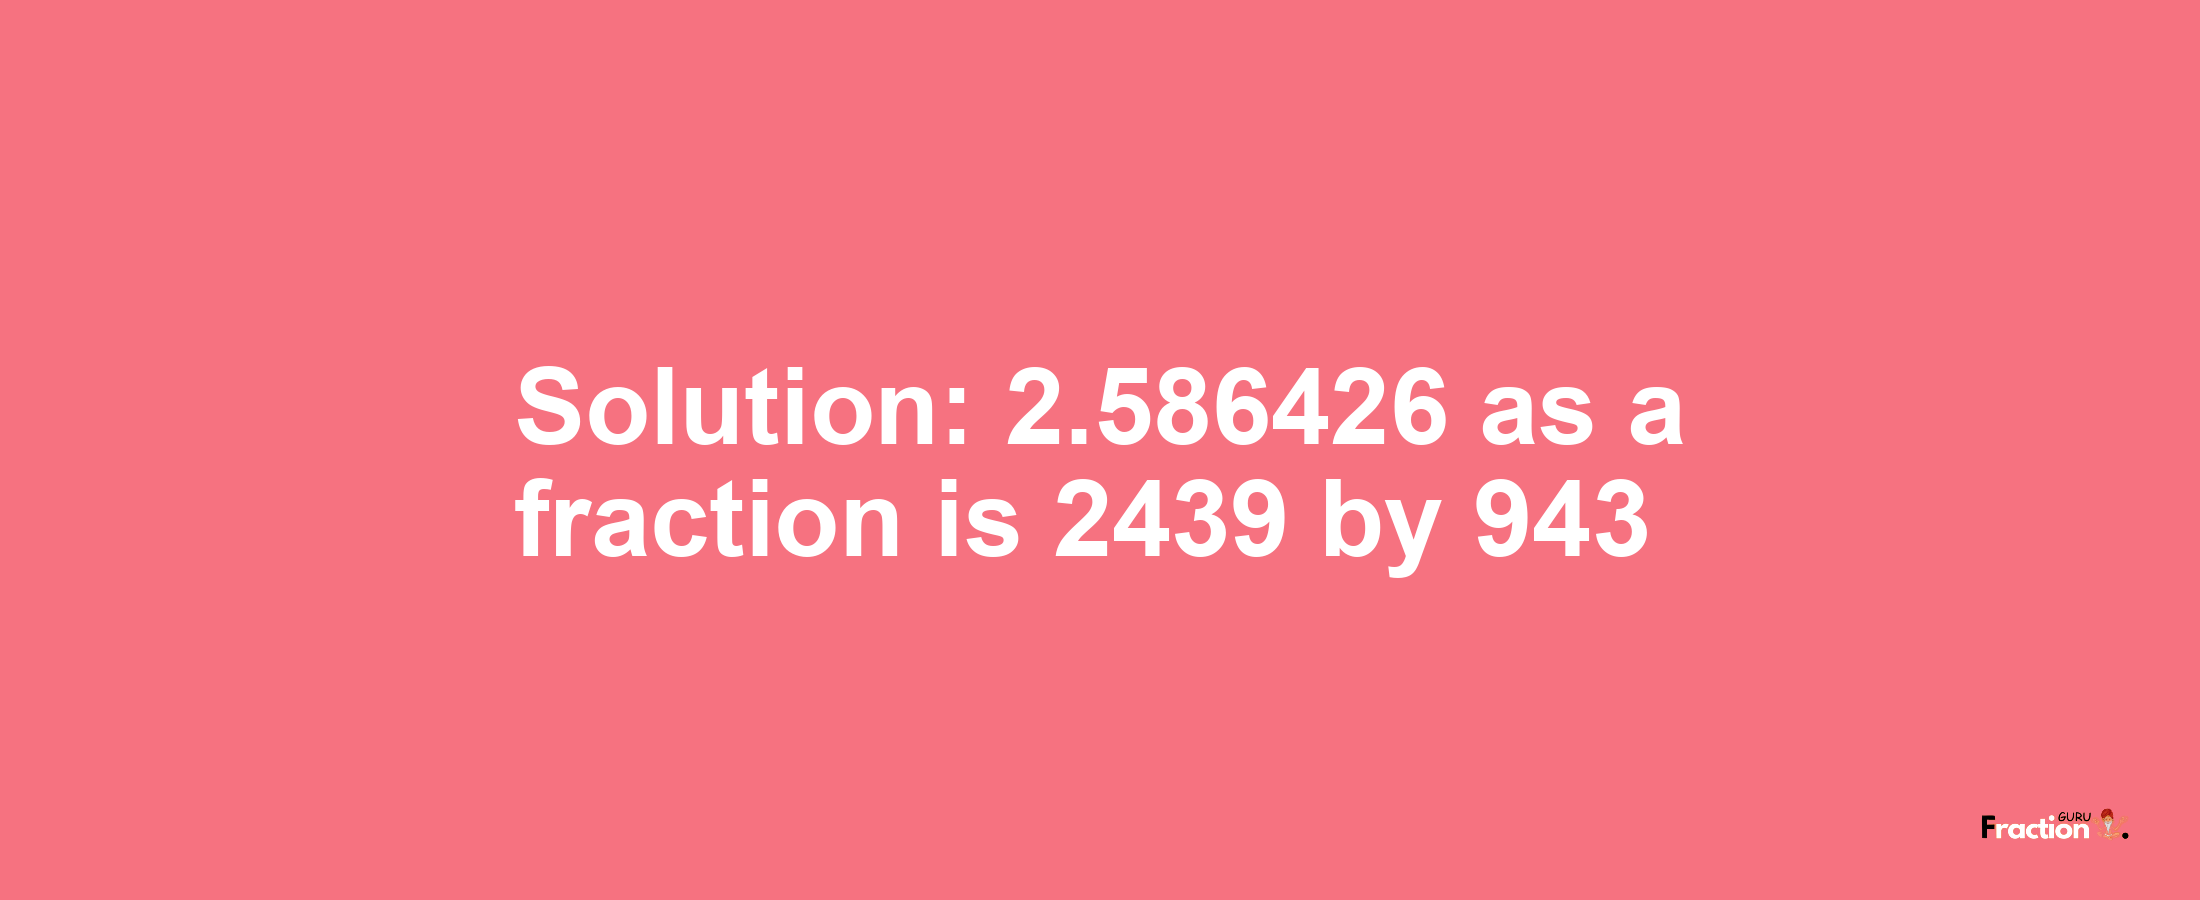 Solution:2.586426 as a fraction is 2439/943